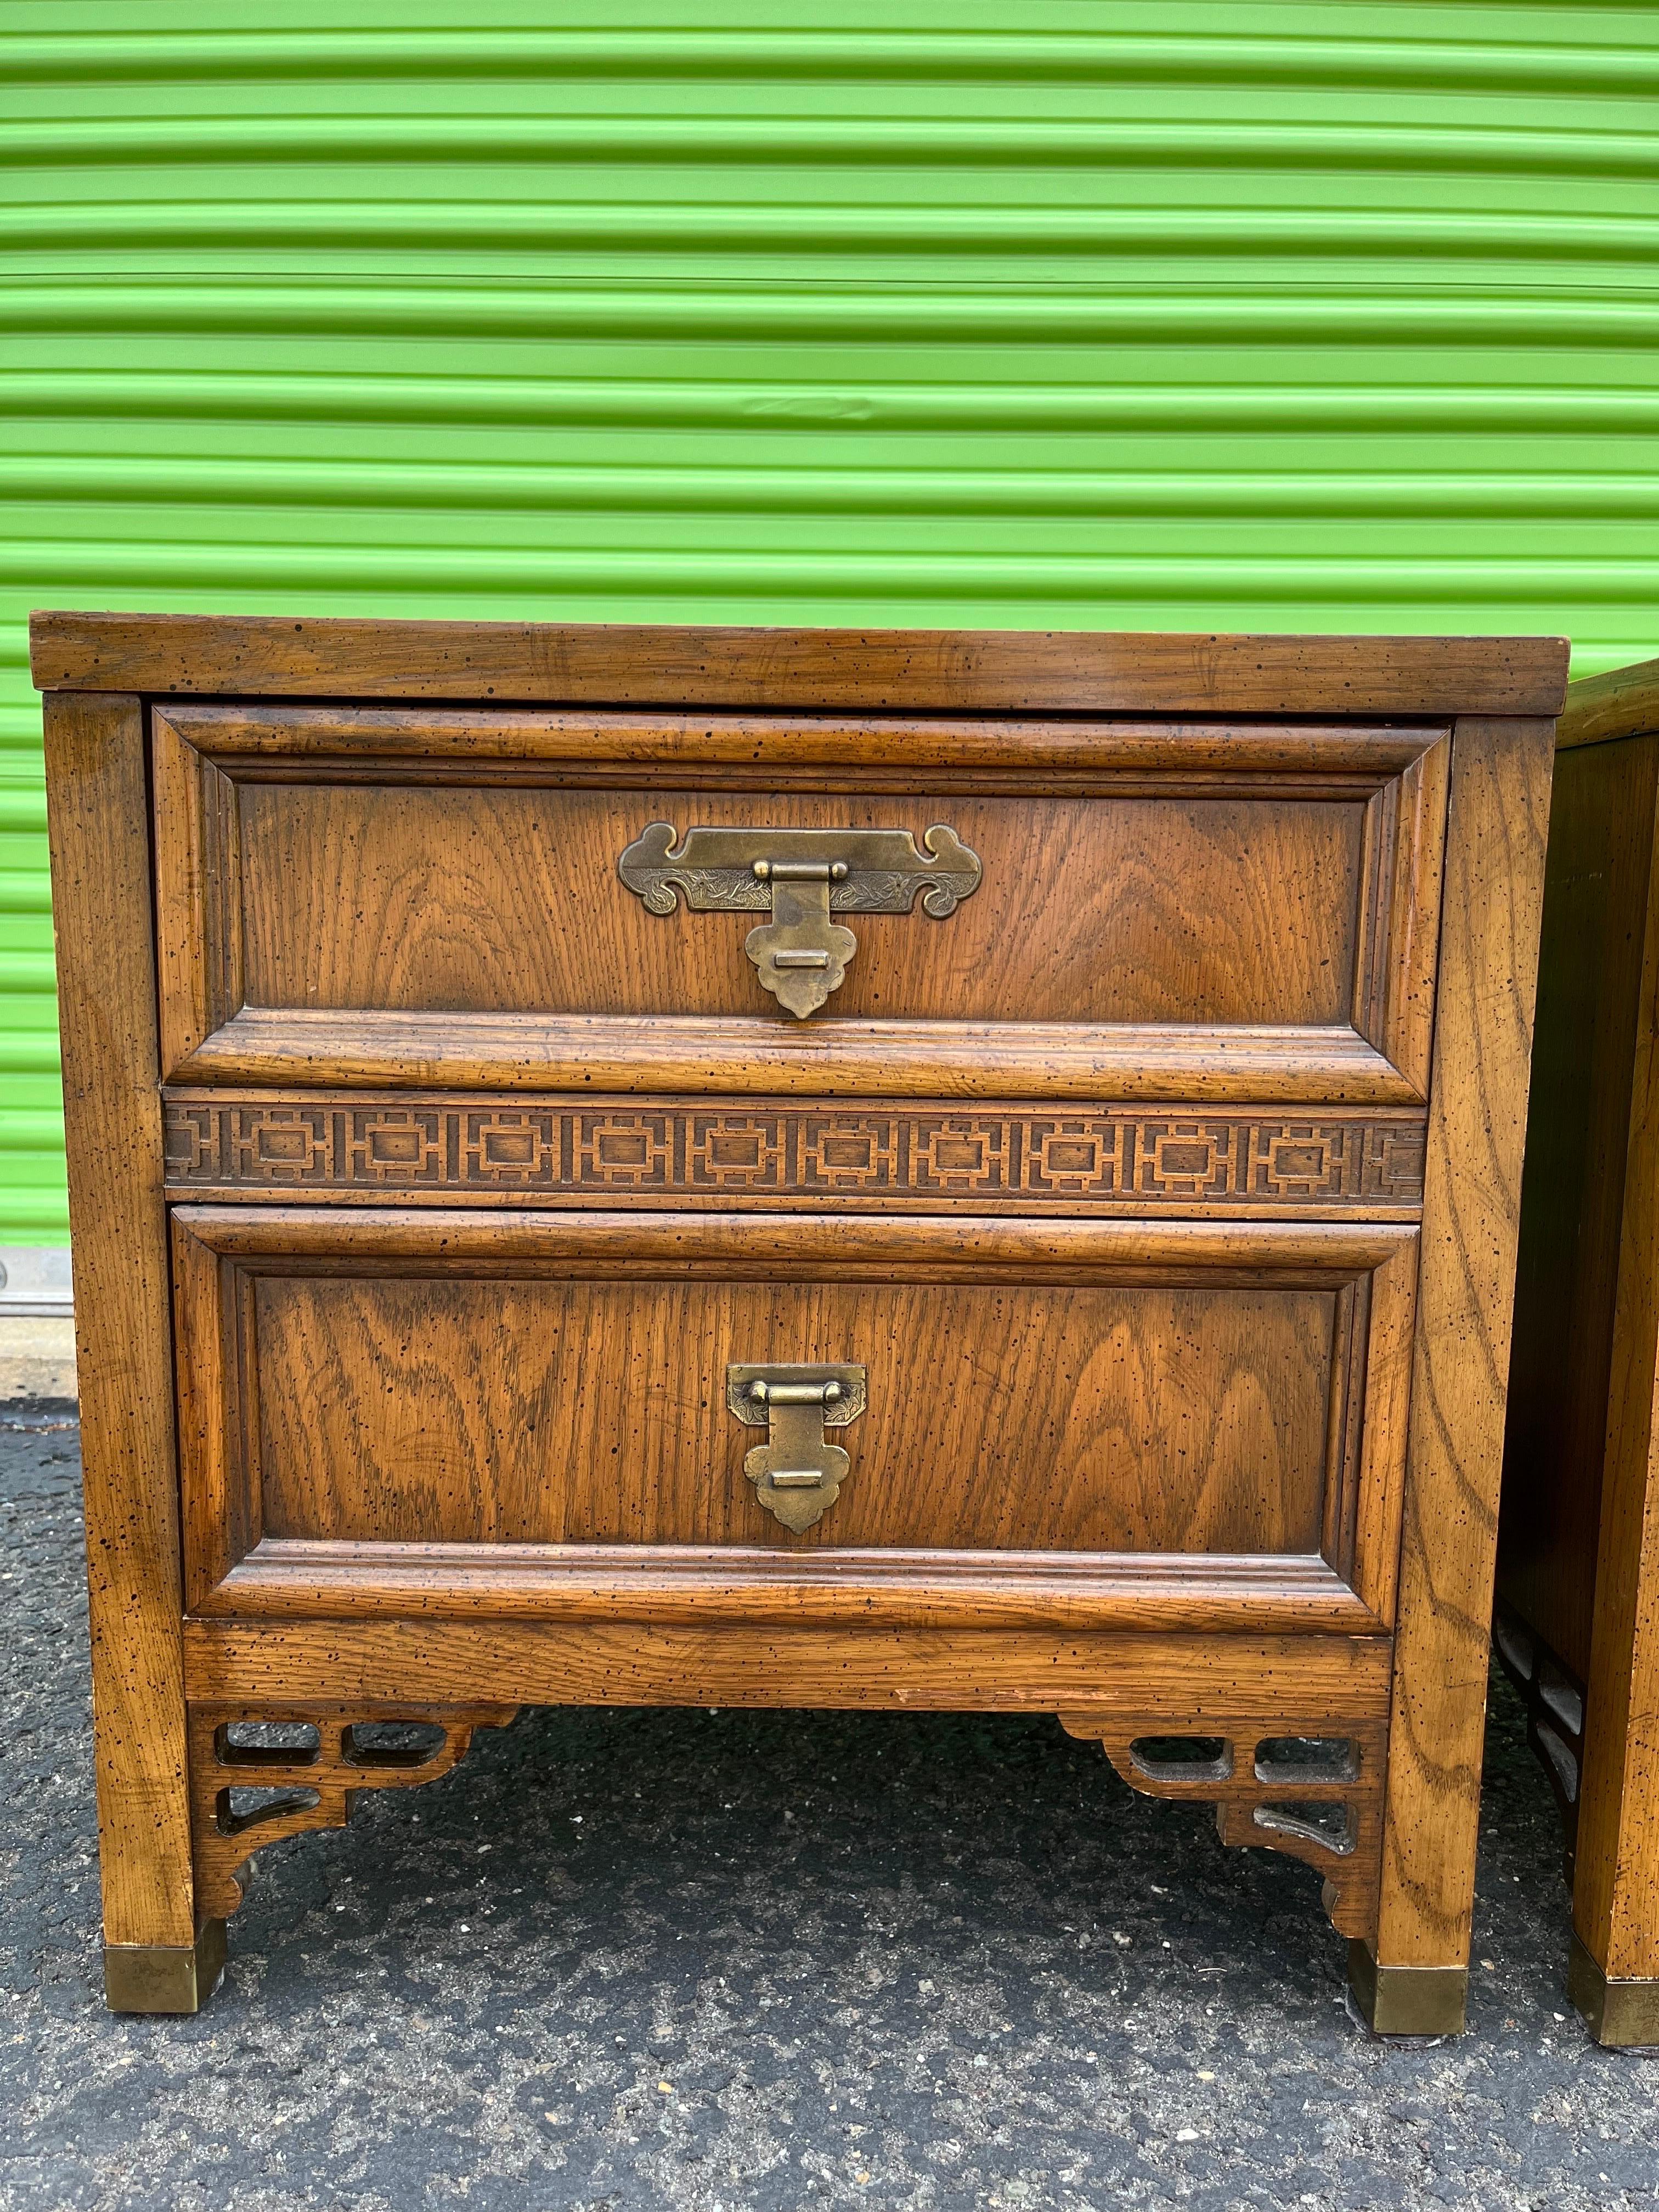 Asian inspired Mid Century nightstands by Dixie. Shangri-La line. Period pieces with a sophisticated vibe. Nice deep detail. Wood case with wood grain laminate tops. Would make great end tables as well.
Curbside to NYC/Philly $350